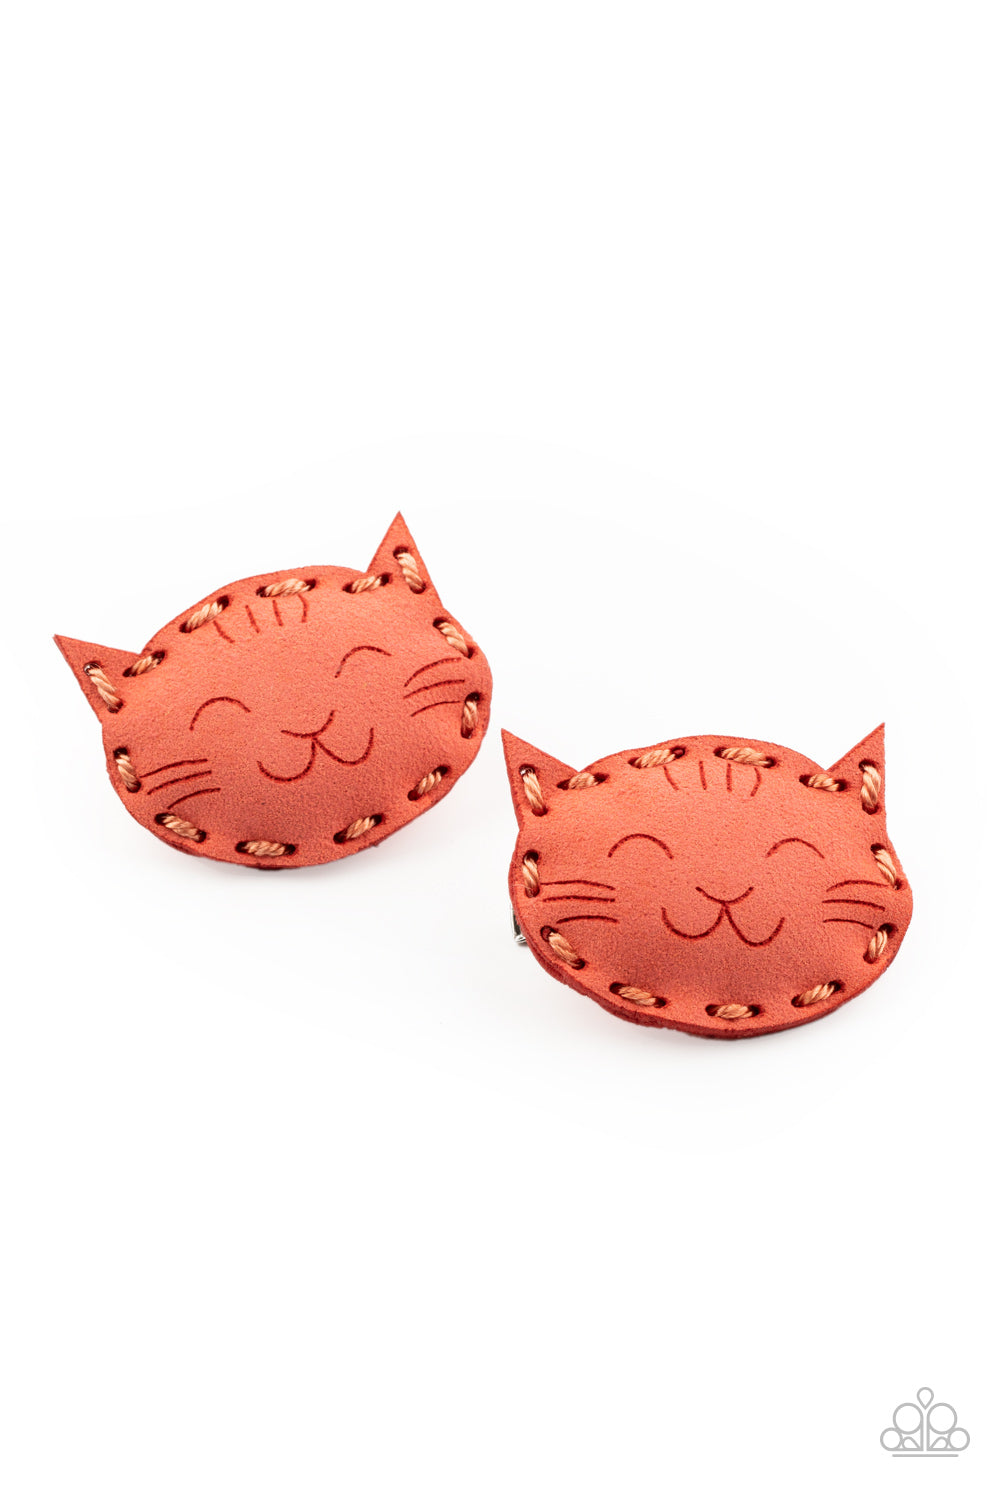 Paparazzi Accessories MEOW Youre Talking! - Orange Hair Clip 